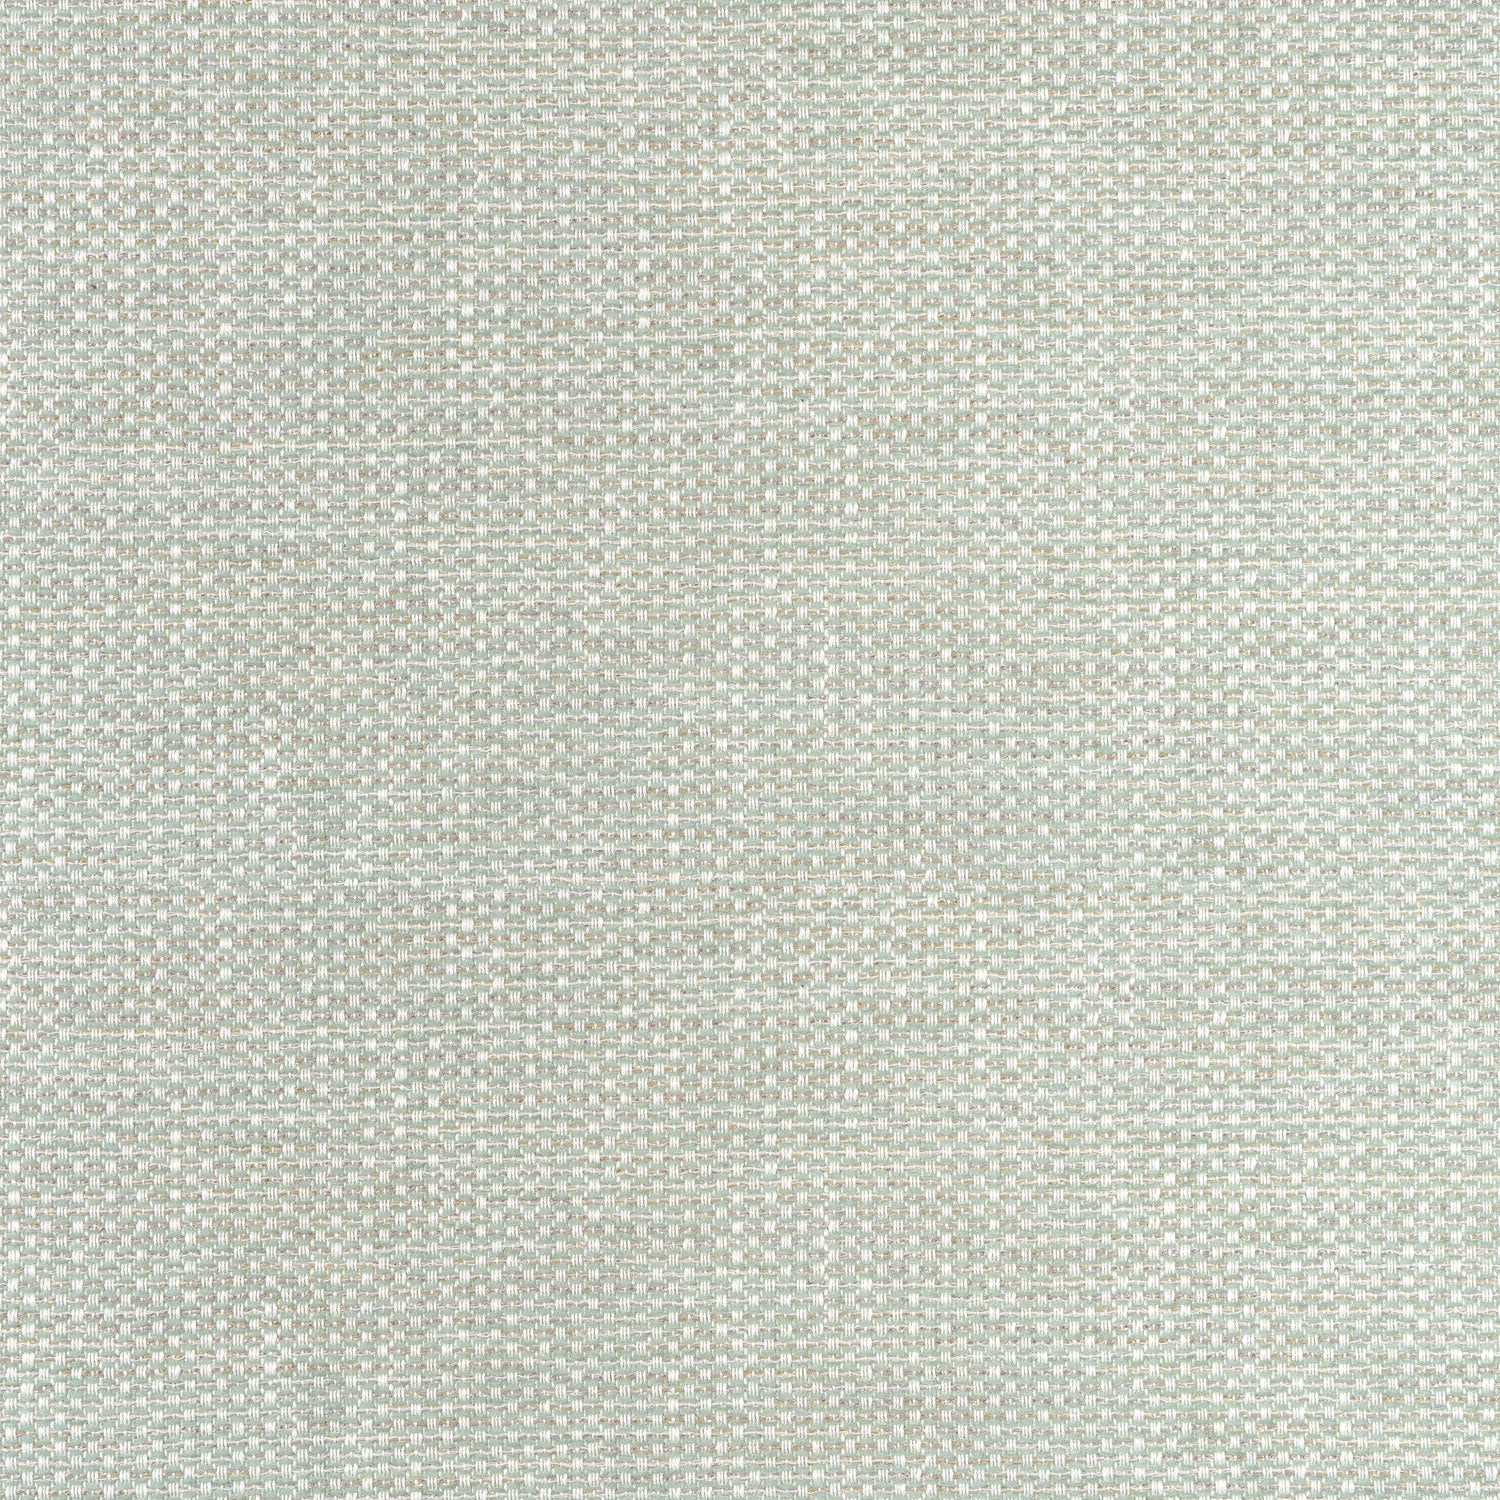 Cascade fabric in celadon color - pattern number W75257 - by Thibaut in the Elements collection